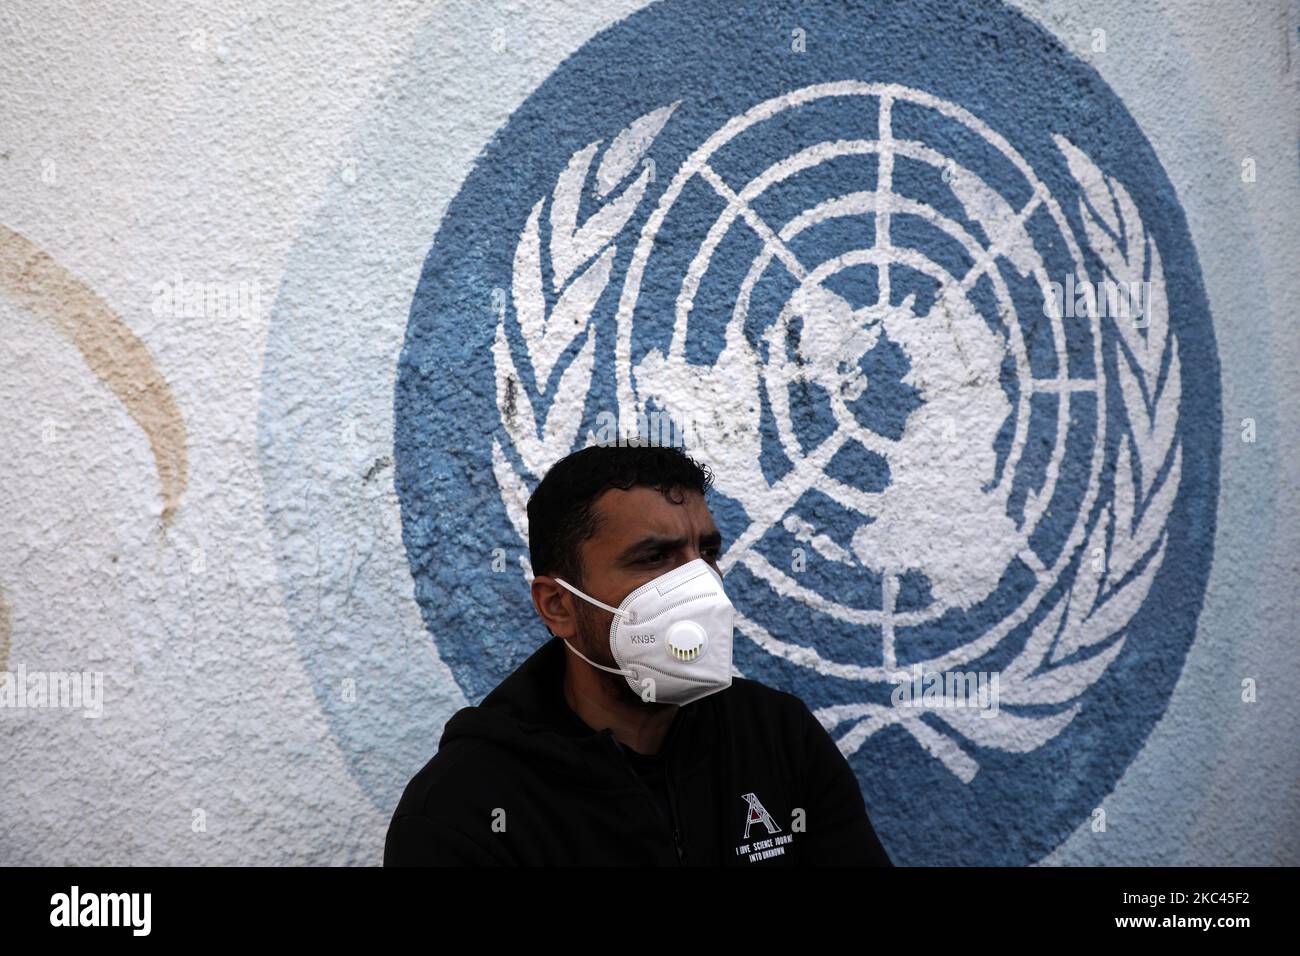 Palestinian UNRWA emplyees, mask-clad due to the COVID-19 coronavirus pandemic, protest outside the headquarters of the United Nations Relief and Works Agency for Palestine Refugees in the Near East (UNRWA) in Gaza City on November 17, 2020 against the reduction of their salaries. financial crisis' ever faced by the UN's agency for Palestinian refugees could lead to 'disaster' in the Gaza Strip and insecurity in Lebanon, the organisation's chief has warned. (Photo by Majdi Fathi/NurPhoto) Stock Photo